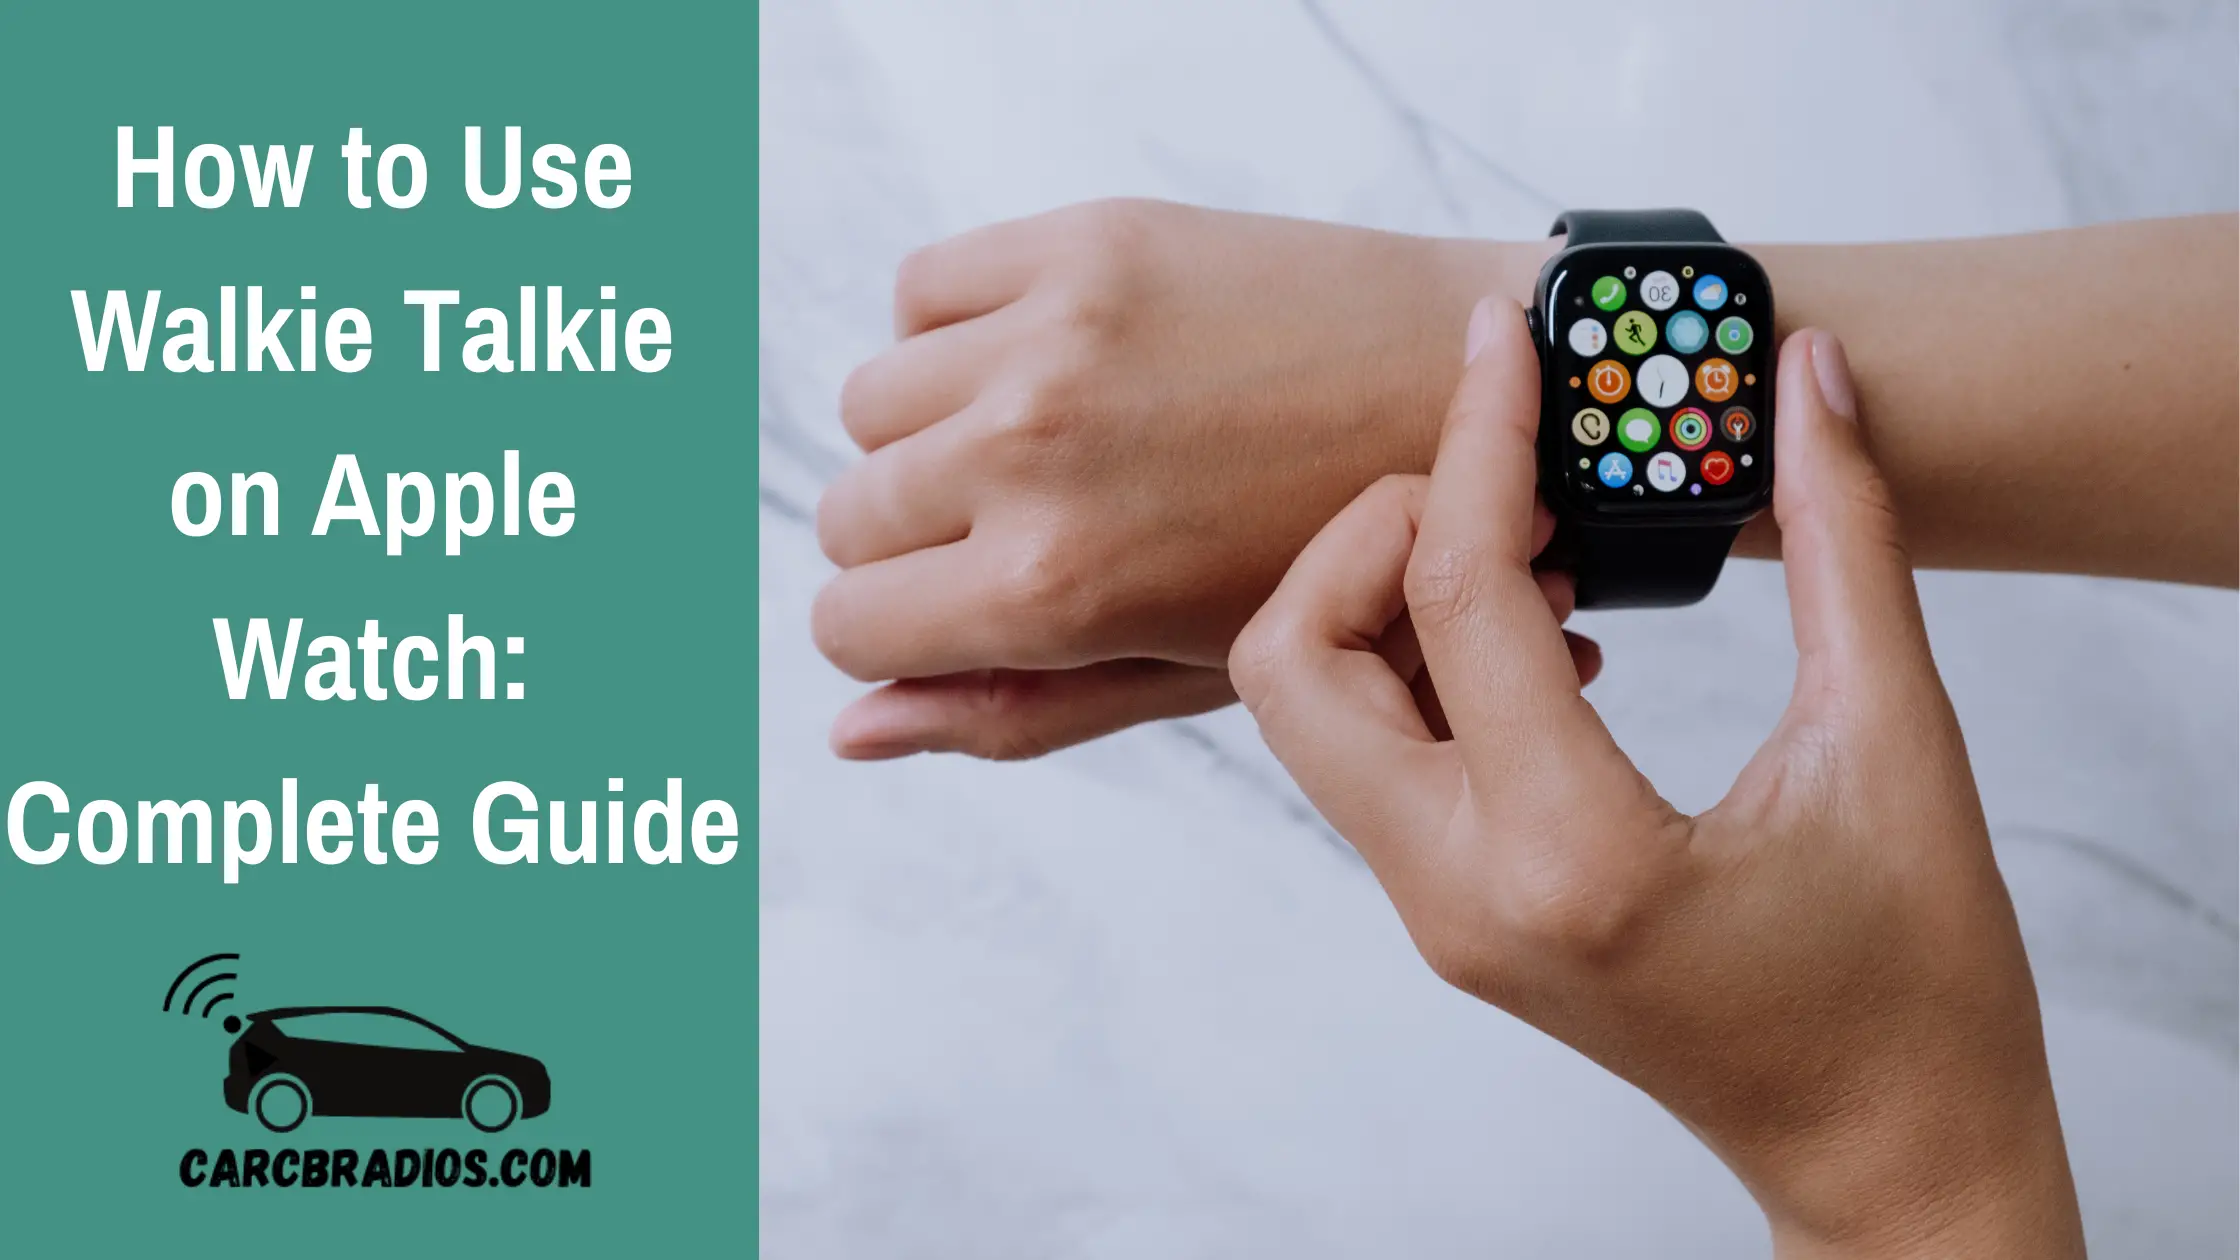 In this guide, I will provide step-by-step instructions on how to set up and use the Walkie-Talkie app on your Apple Watch. I will also cover how to trigger the app with a tap, disable it, make yourself unavailable, and remove friends from the app. By the end of this article, you will be a pro at using the Walkie-Talkie feature on your Apple Watch.